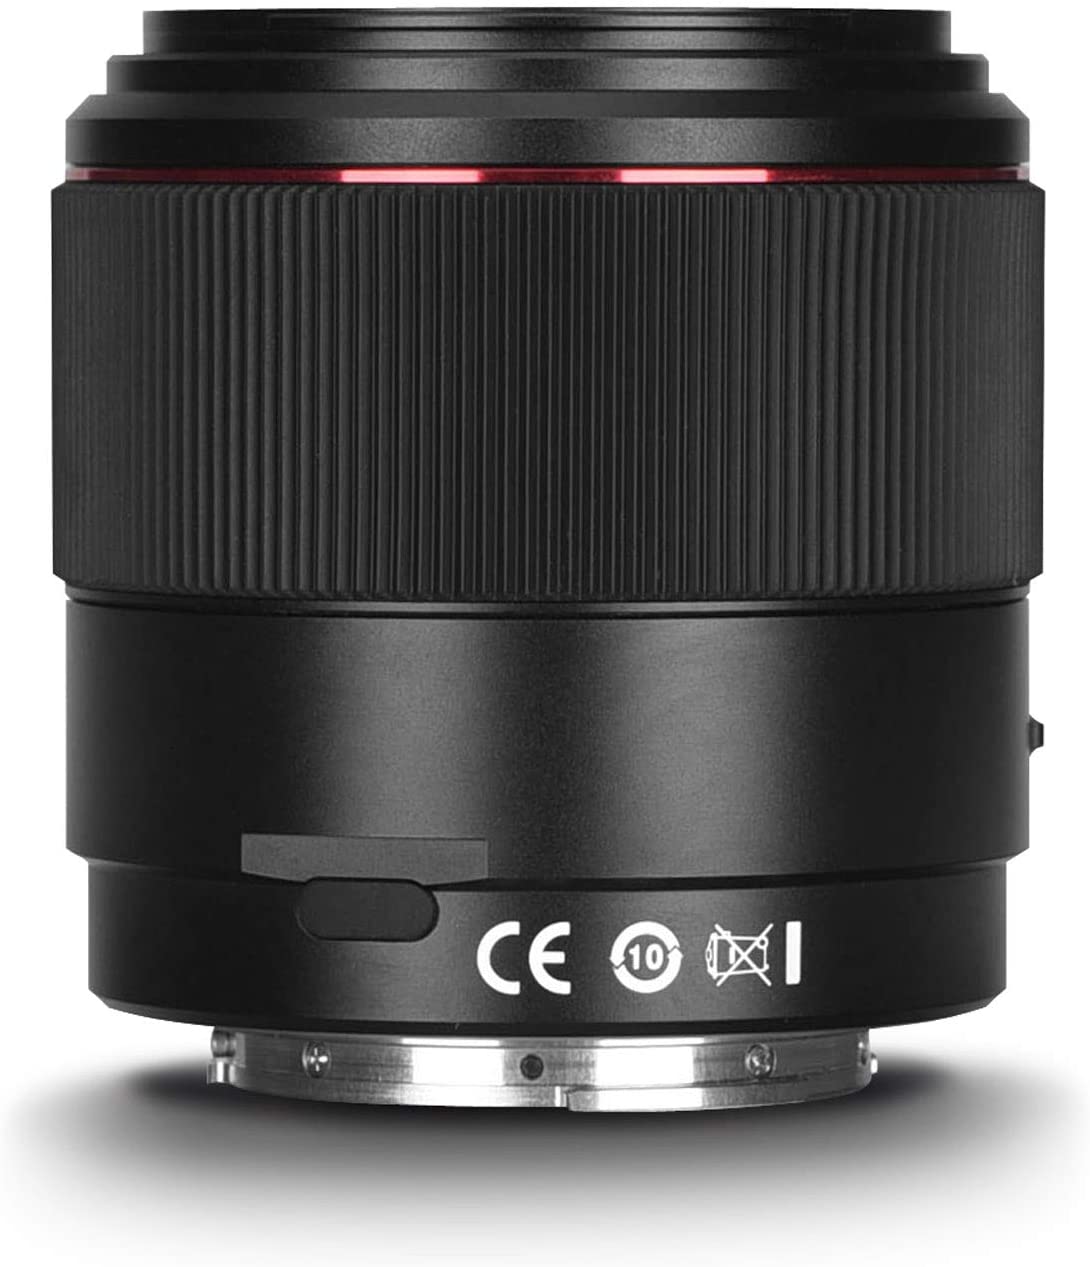 Yongnuo 35mm F2.0S DF DSM Auto Focus Wide Angle Prime Lens for Sony, F2 Large Aperture Full Frame APS-C for Sony E Mount Camera YN35MM